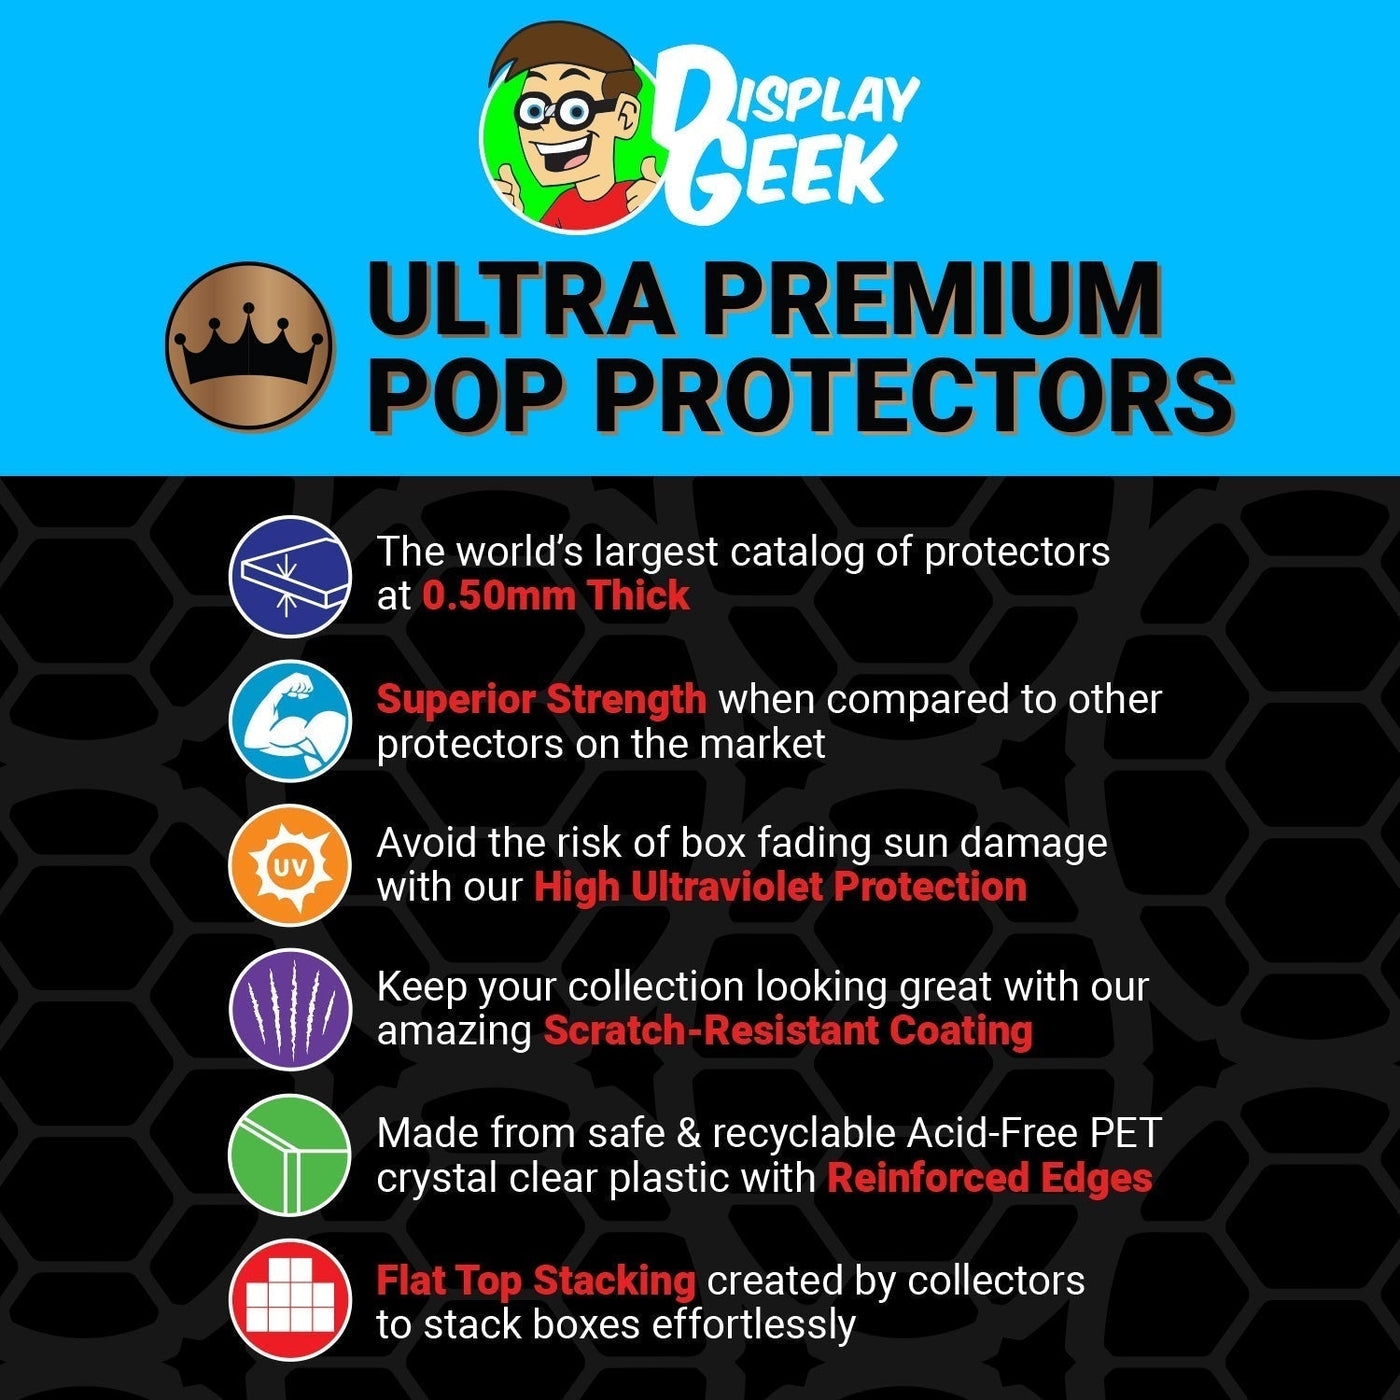 Pop Protector for Guardians Ship Mantis in Benatar #1022 Funko Pop Deluxe on The Protector Guide App by Display Geek